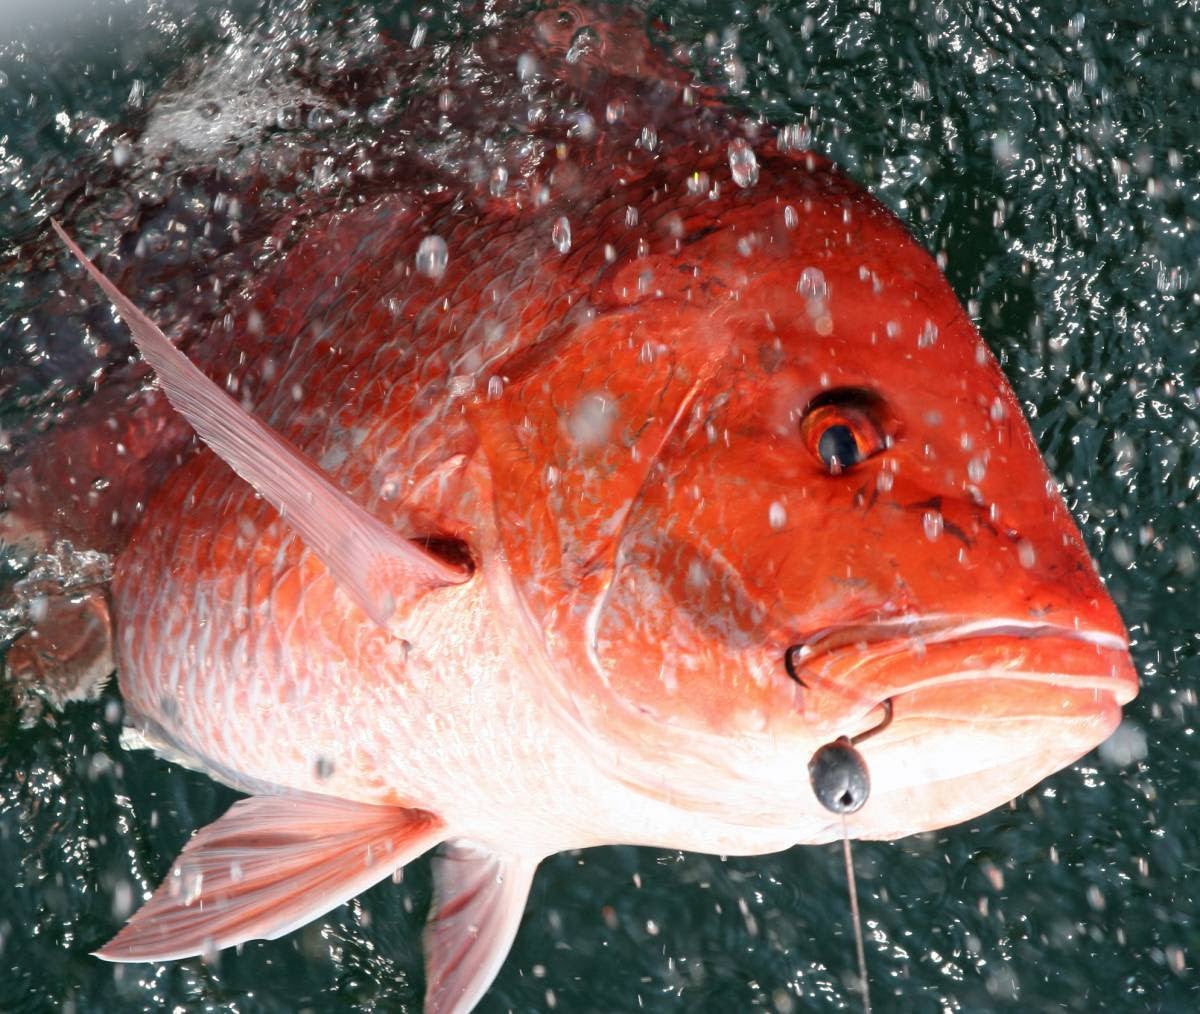 Alabama Announces Additional Days of Red Snapper Season for Private Anglers